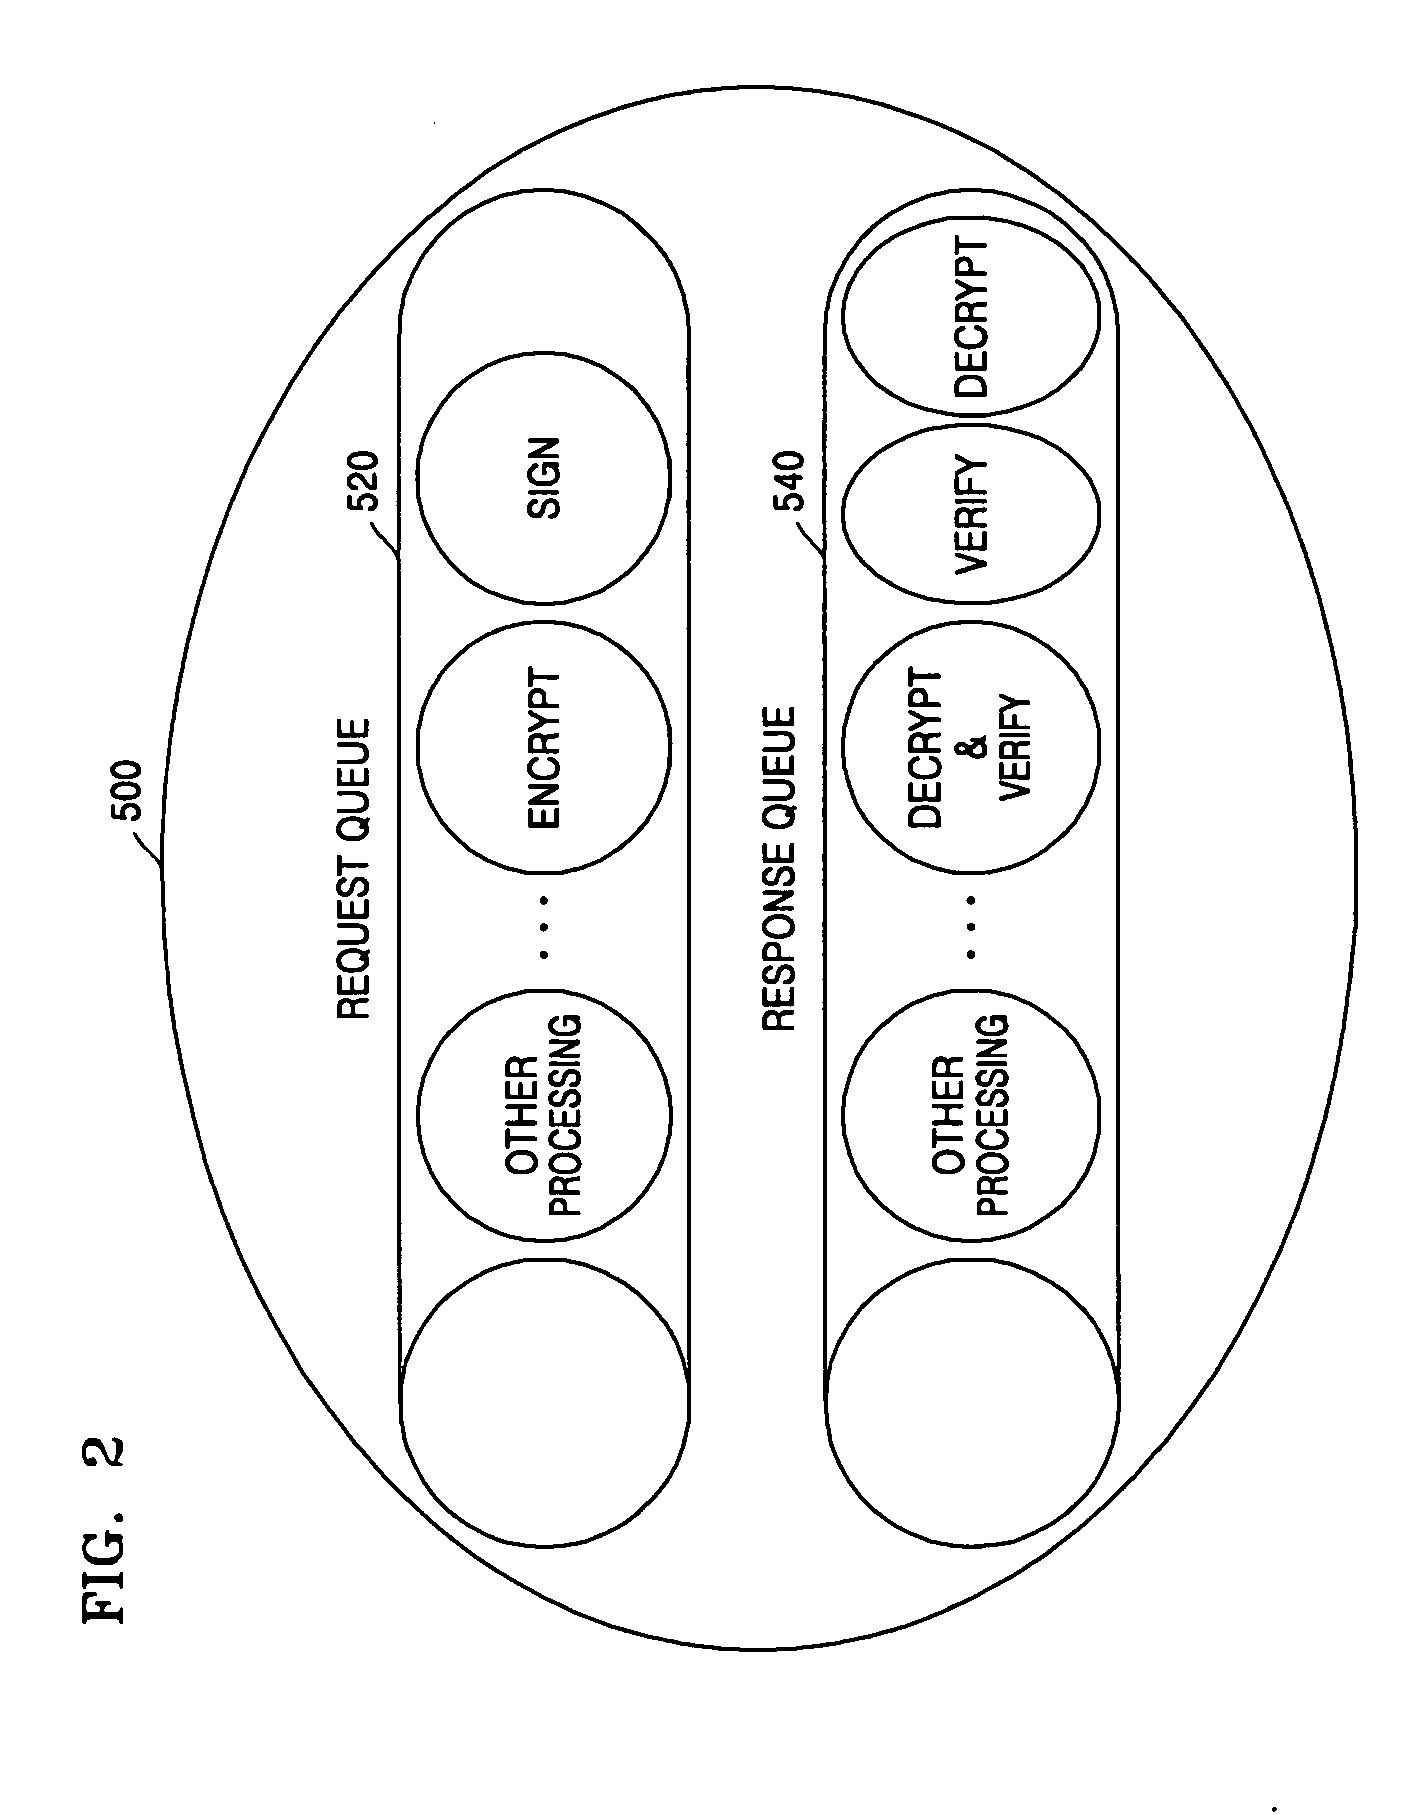 Message security processing system and method for web services